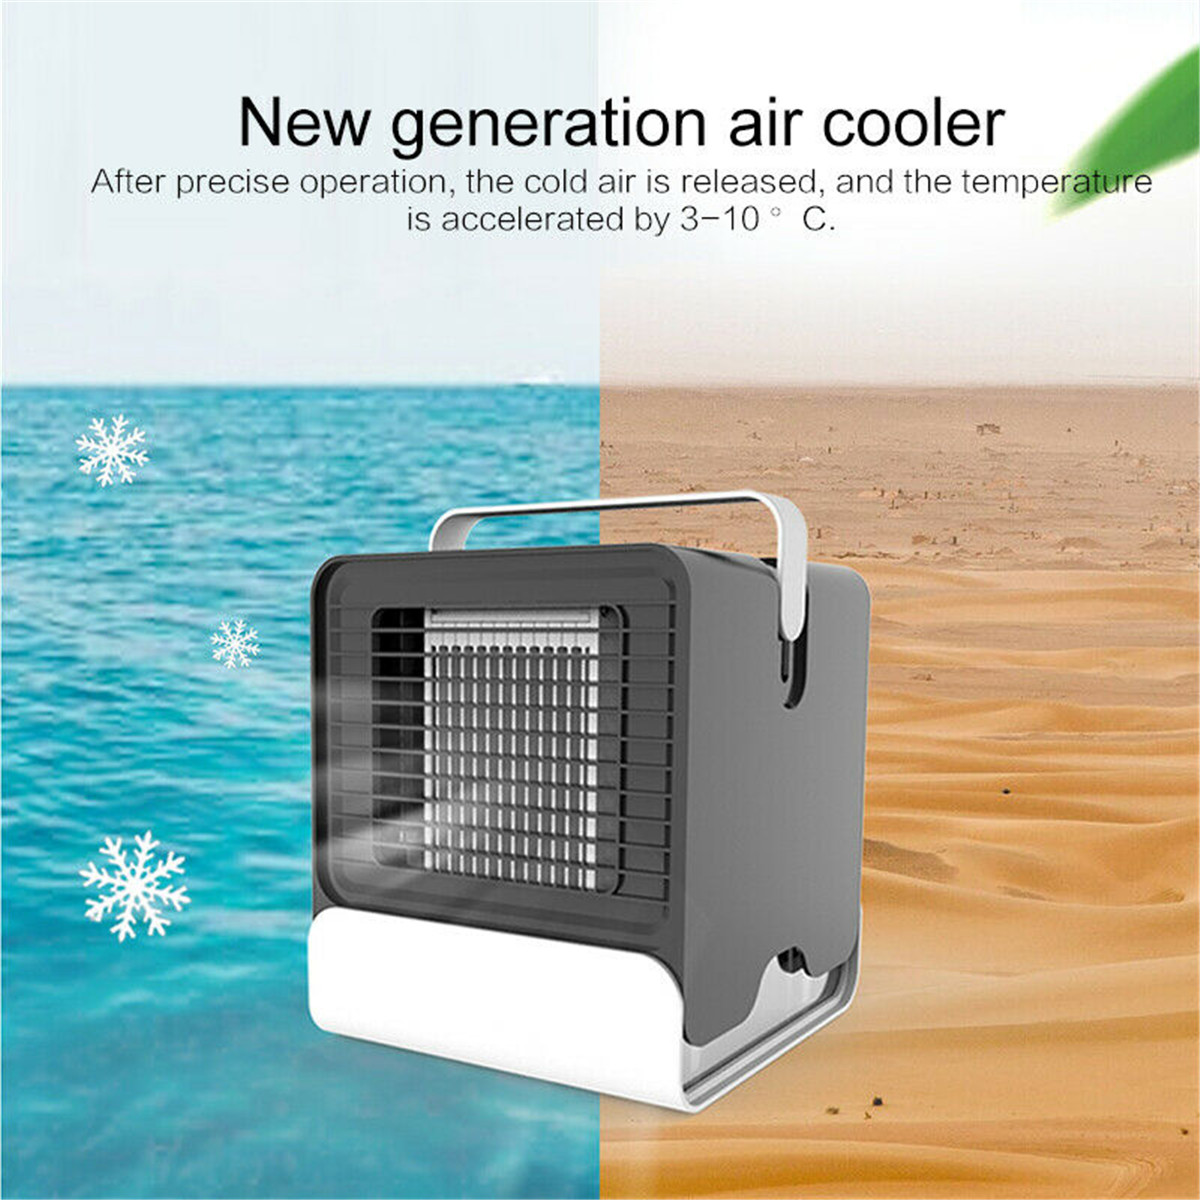 Mini-Portable-Air-Conditioner-Night-Light-Conditioning-Cooler-Humidifier-Purifier-USB-Desktop-Air-Co-1710195-10